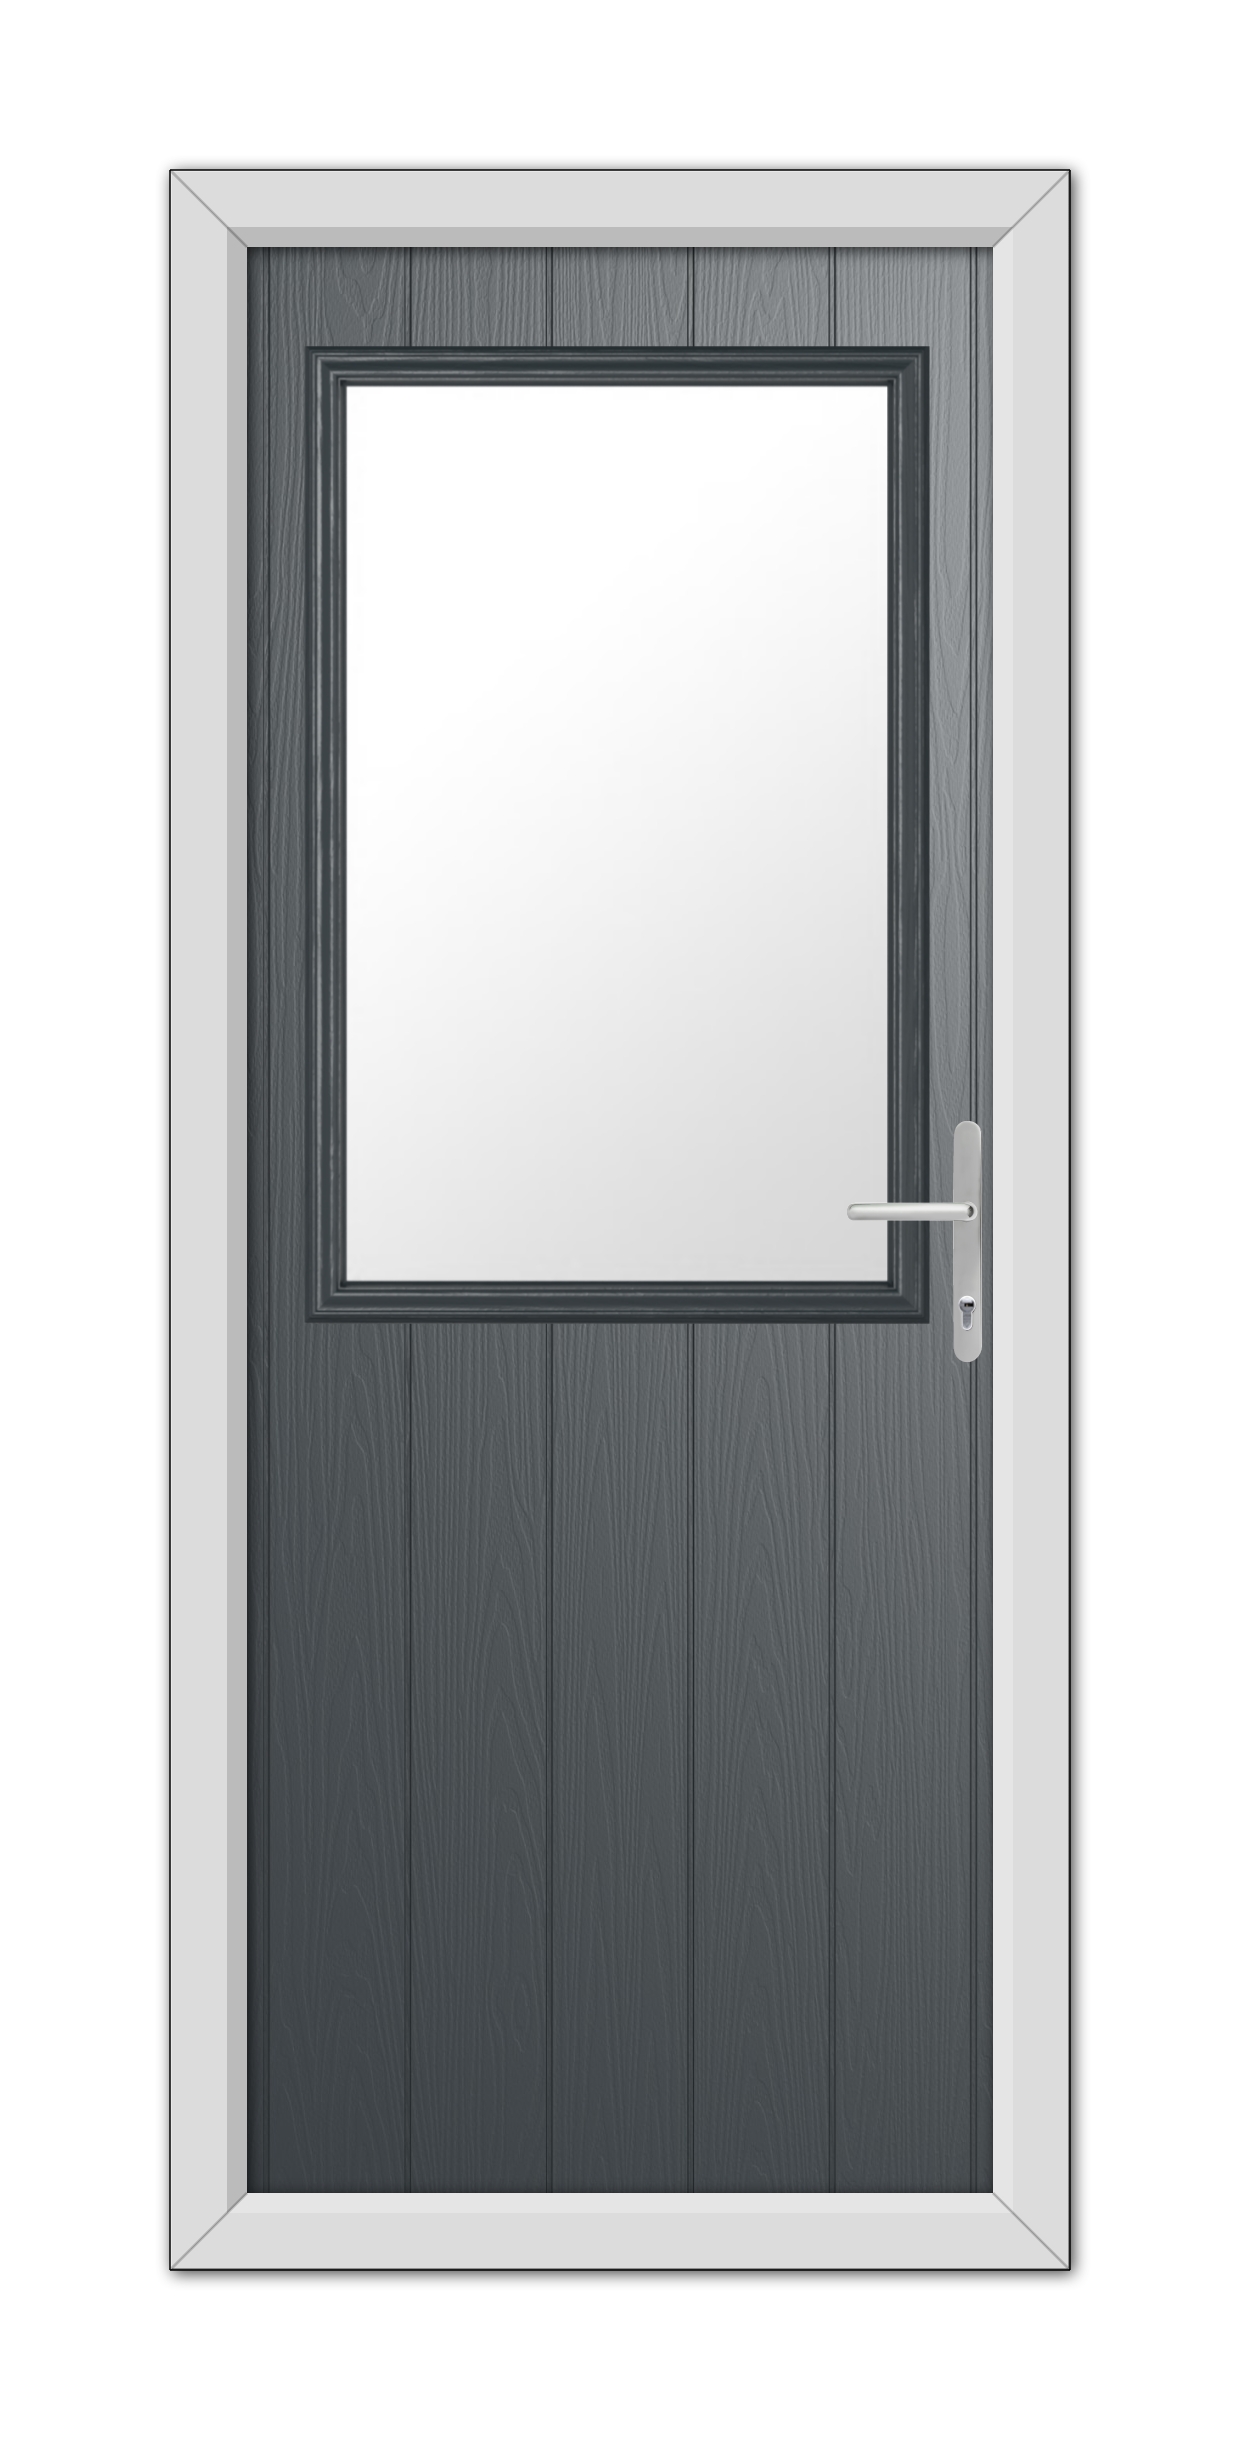 A modern Anthracite Grey Clifton Composite Door 48mm Timber Core with a white frame, featuring a centered square window and a handle on the right.